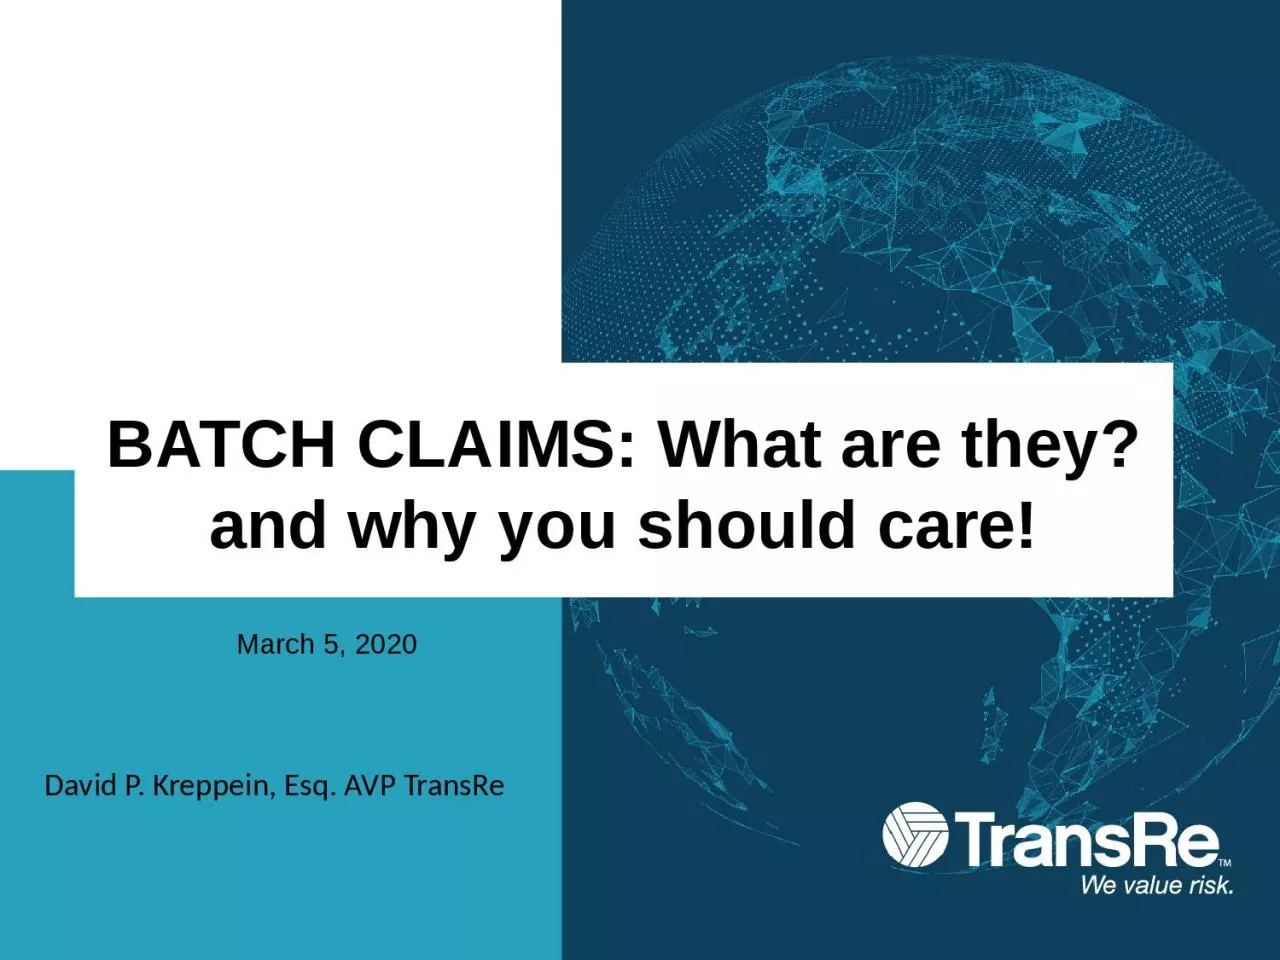 BATCH CLAIMS: What are they? and why you should care!